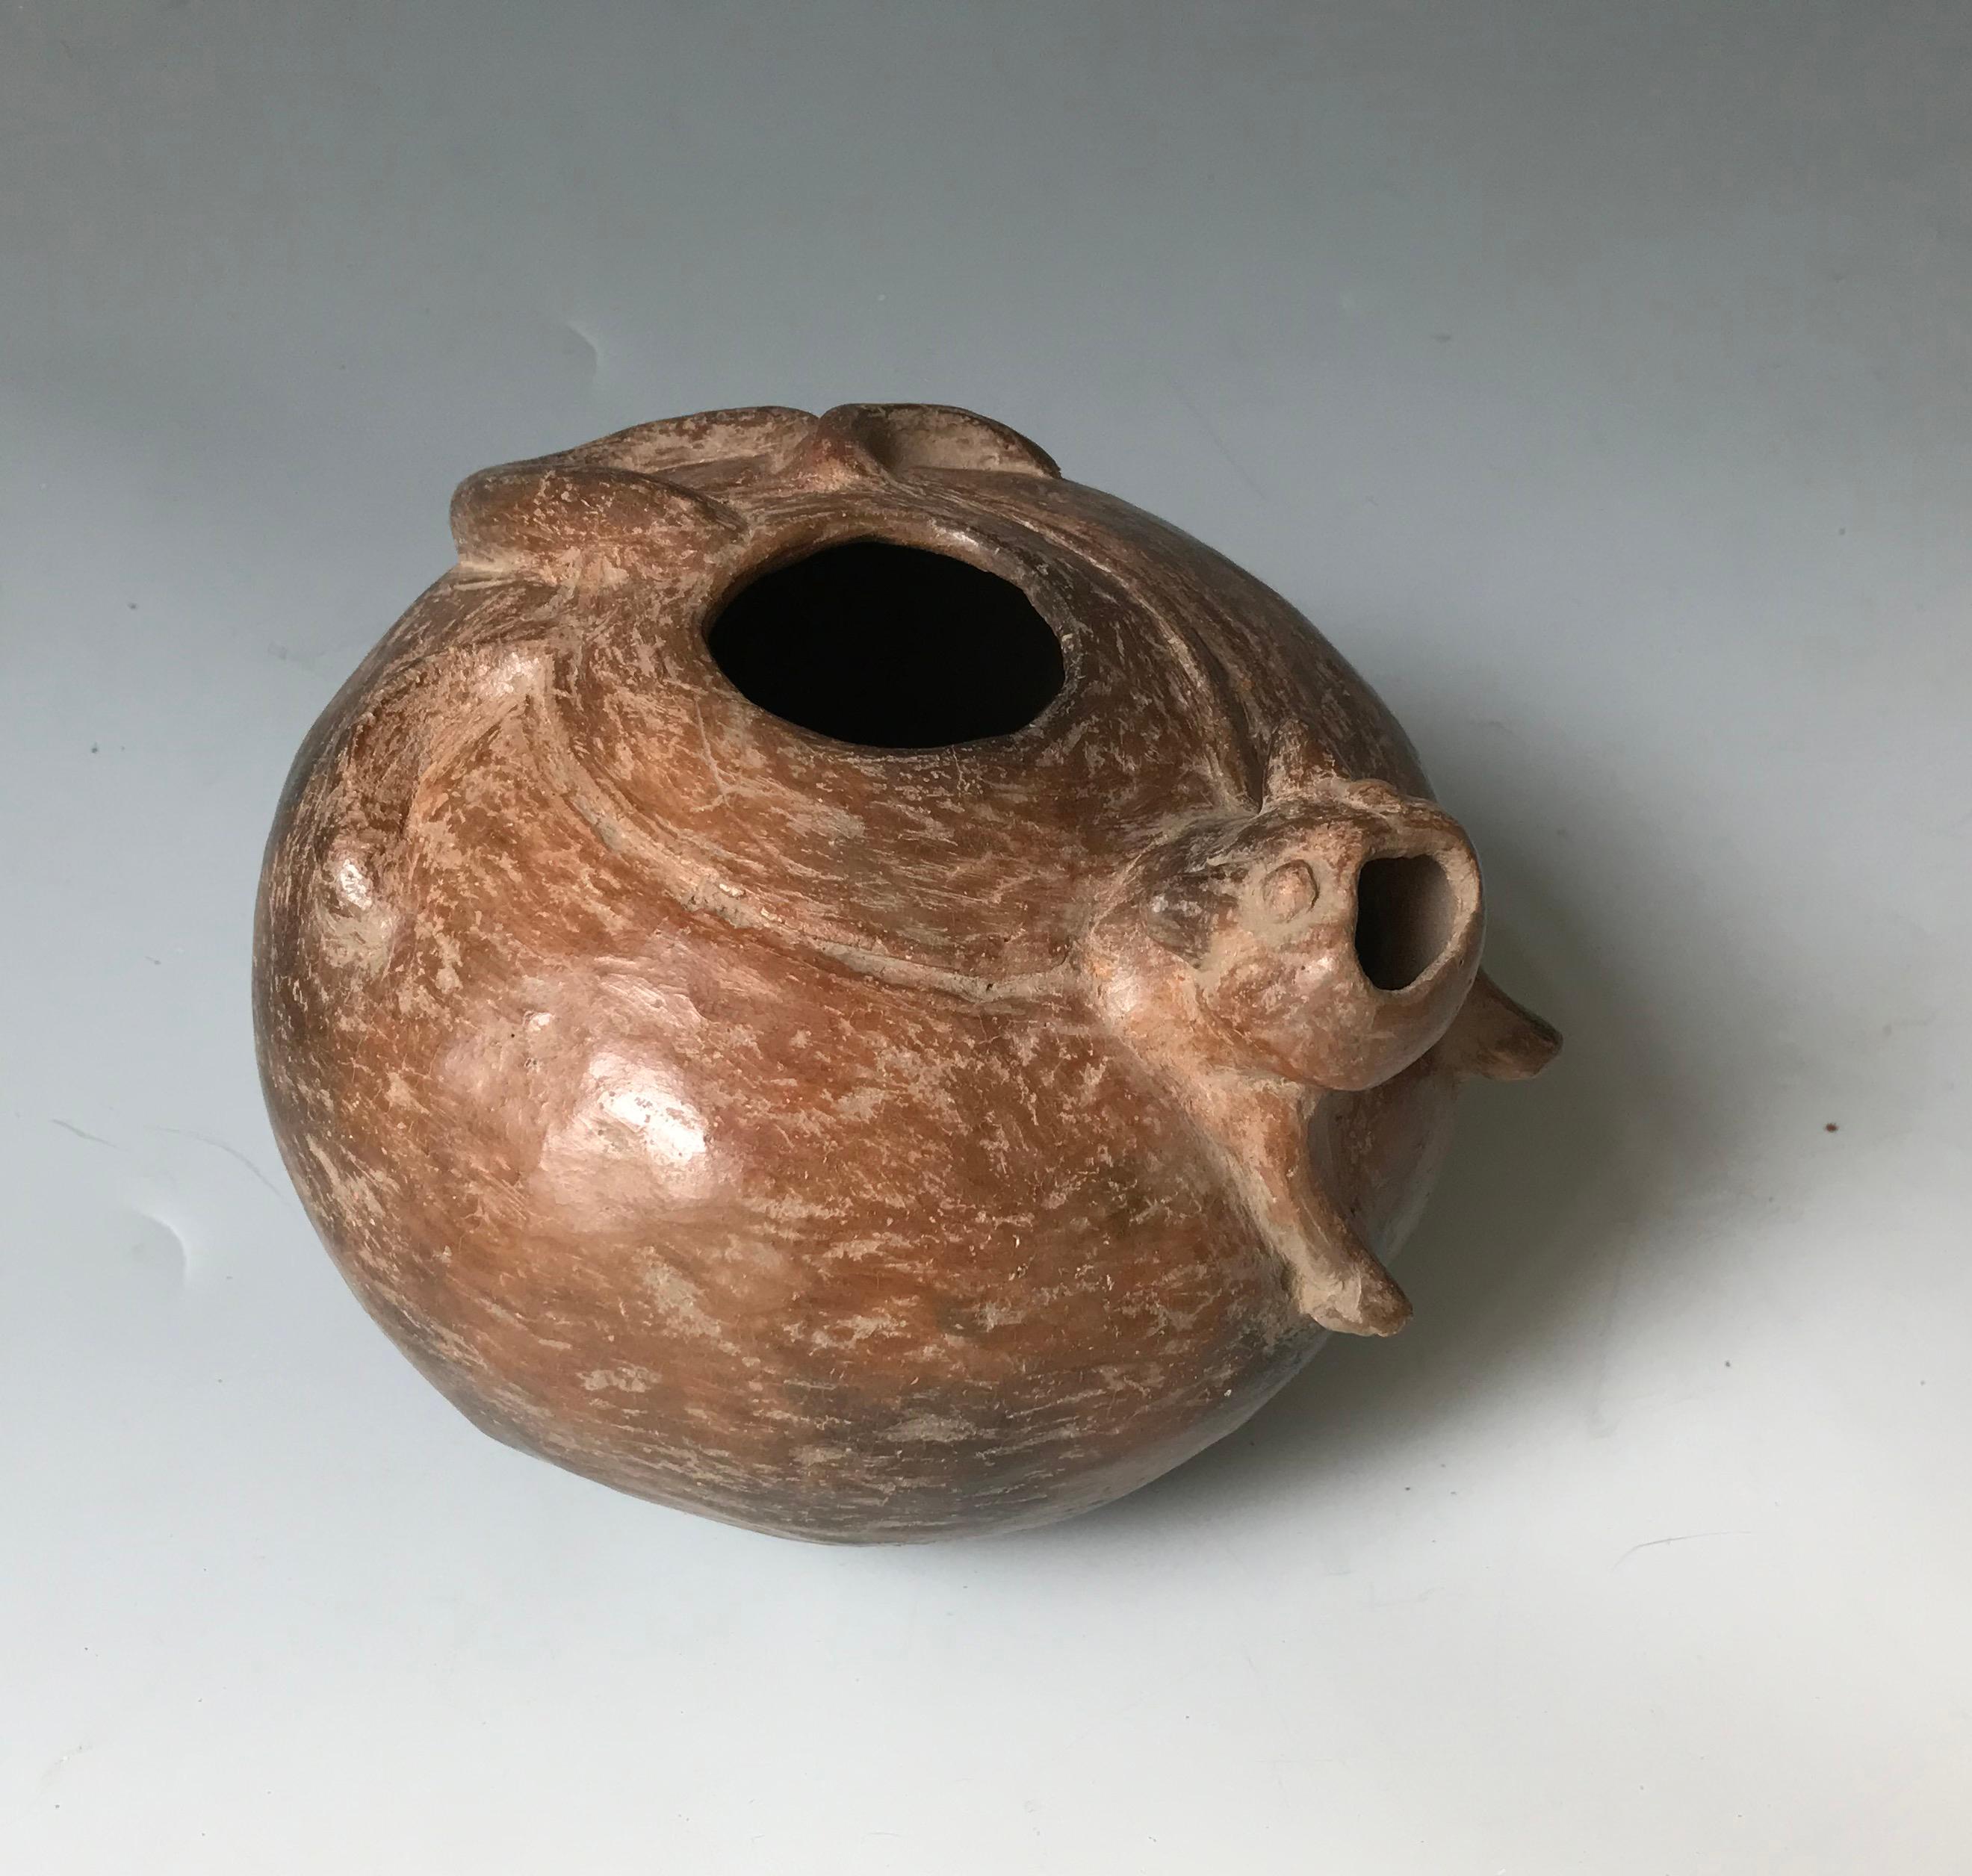 A Pre Columbian Chorrera Bahia vessel
A attractive finely made round pottery bowl in brown clay featuring a splayed animal on top, probably representing a Feline, the head with open mouth acting as a spout.
Chorrera Bahia transitional period circa